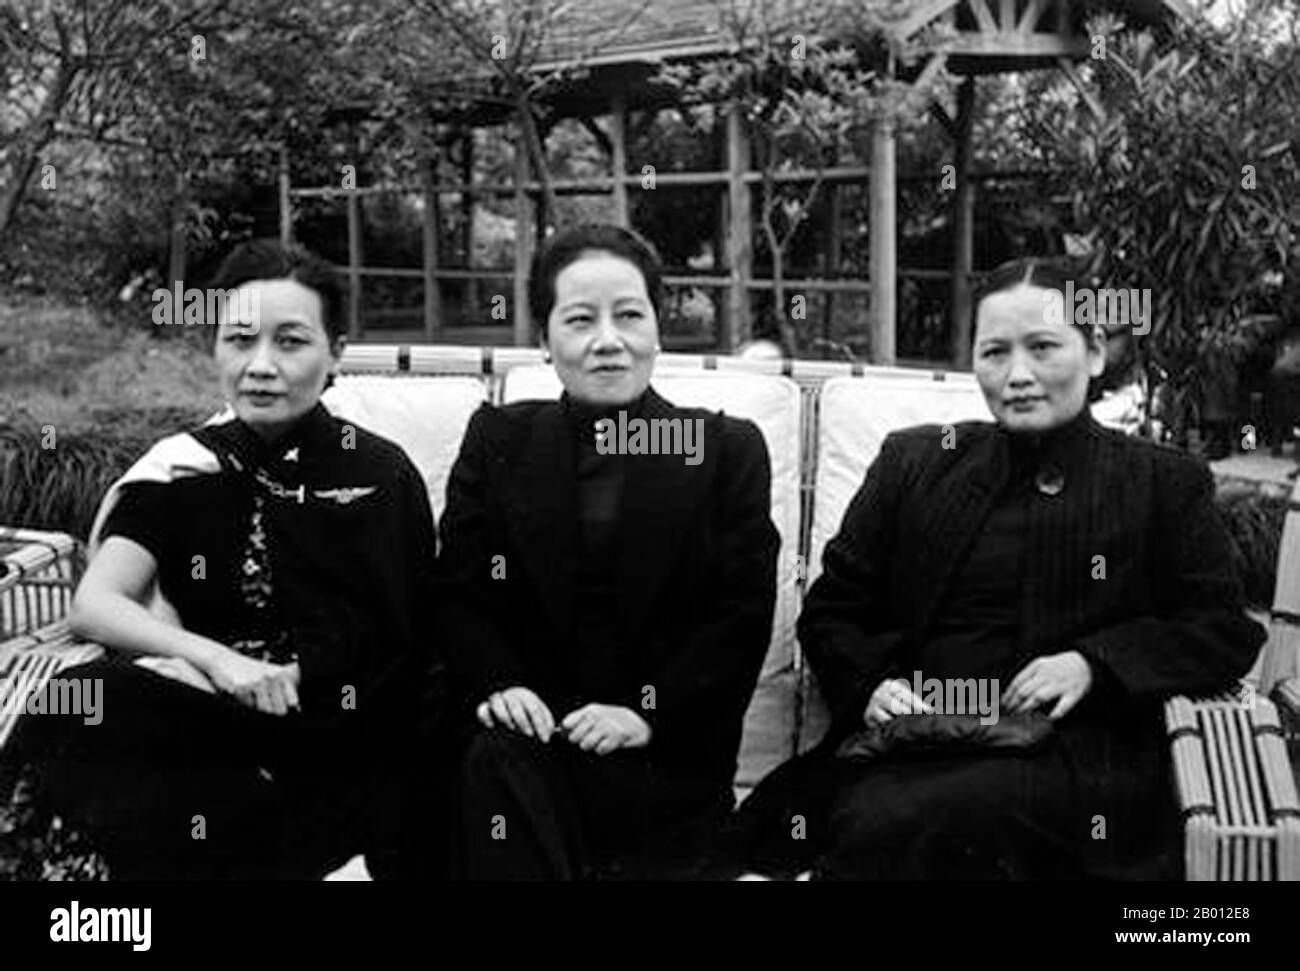 China: The Soong Sisters, Meiling, Ailing and Qingling Soong, Chongqing, 1942.  The Soong Sisters (Songjia Jiemei, or 'Song Household Sisters') were three Hakka Chinese women who were, along with their husbands, among China's most significant political figures of the 20th century. They each played a major role in influencing their husbands, which, along with their own positions of power, ultimately changed the course of Chinese history. Stock Photo